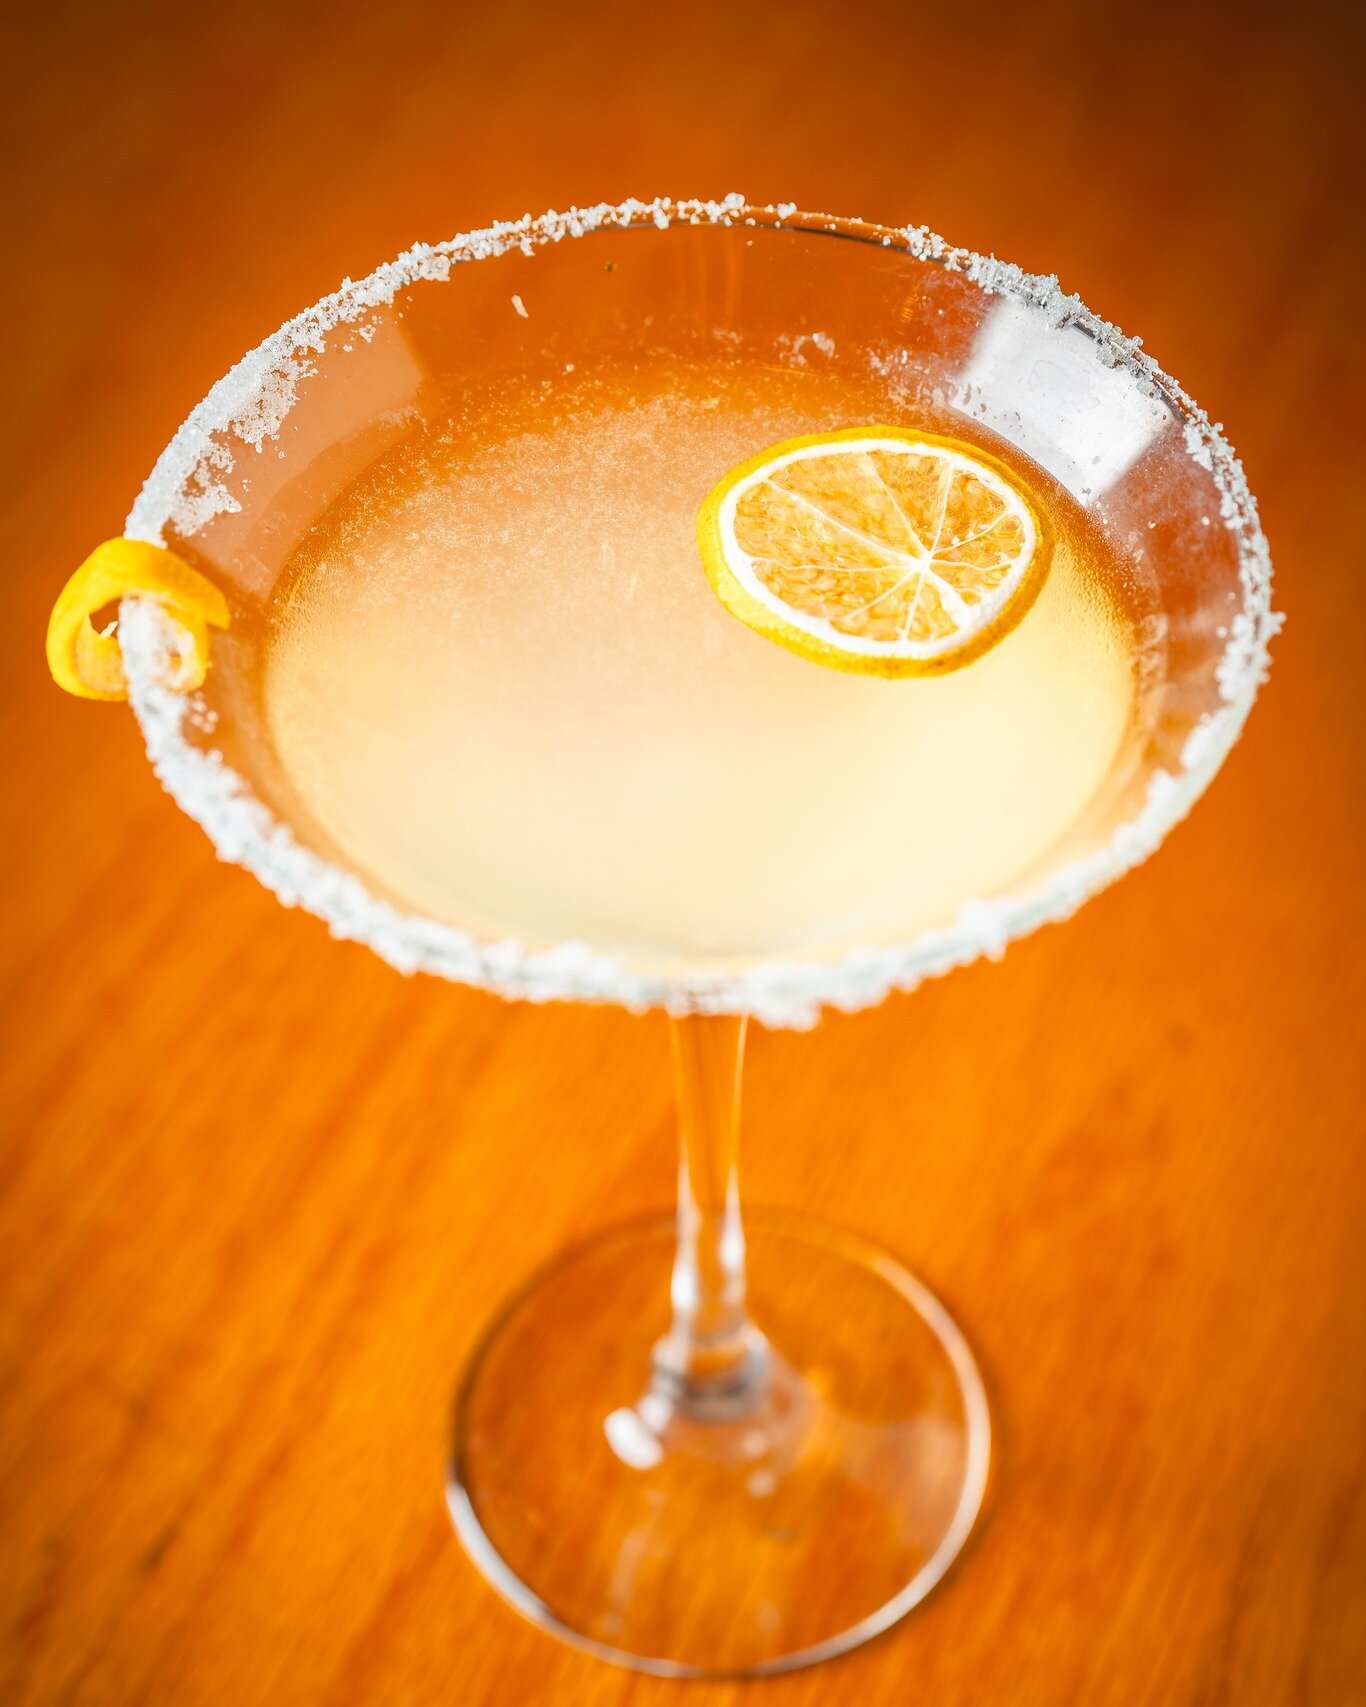 Don&rsquo;t think about the cocktail, drink the cocktail🍹👌 It is time to come see us and enjoy our Lemon Drop Cocktail!🍹 You won't be disappointed!

Find us at
📍Whiteville, NC
📍Zebulon, NC
📍Elizabethtown, NC
📍Shallotte, NC

#sanjosenc #elizabe